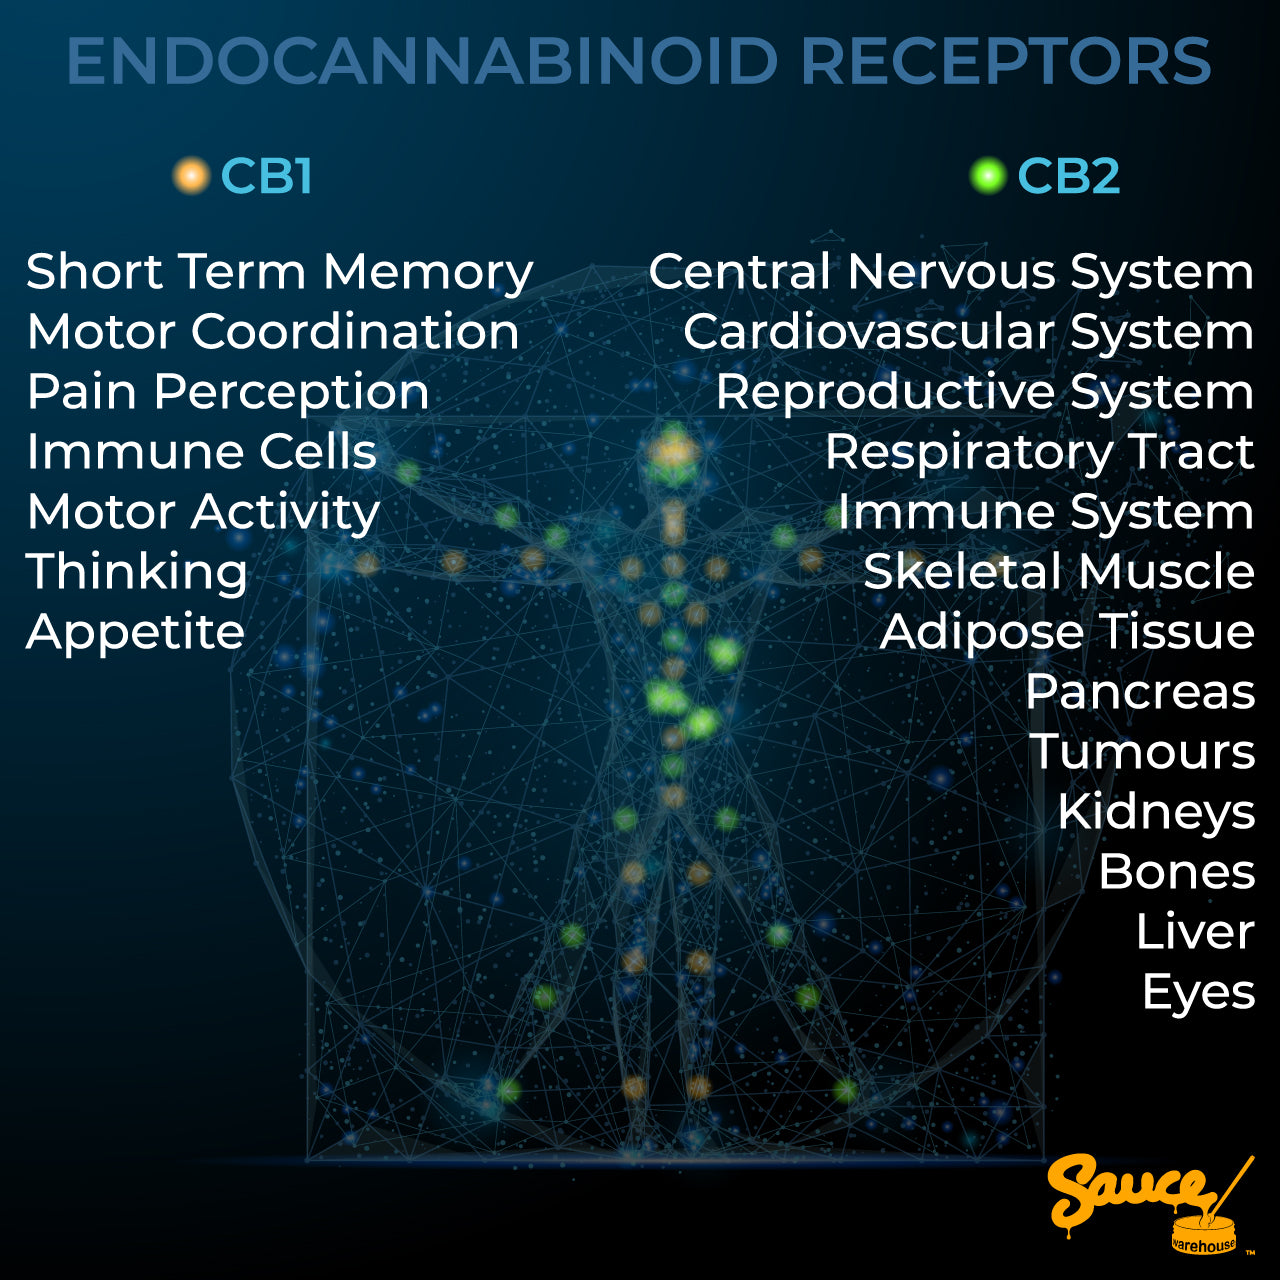 Infographic showing the different types of endocannabinoid receptors